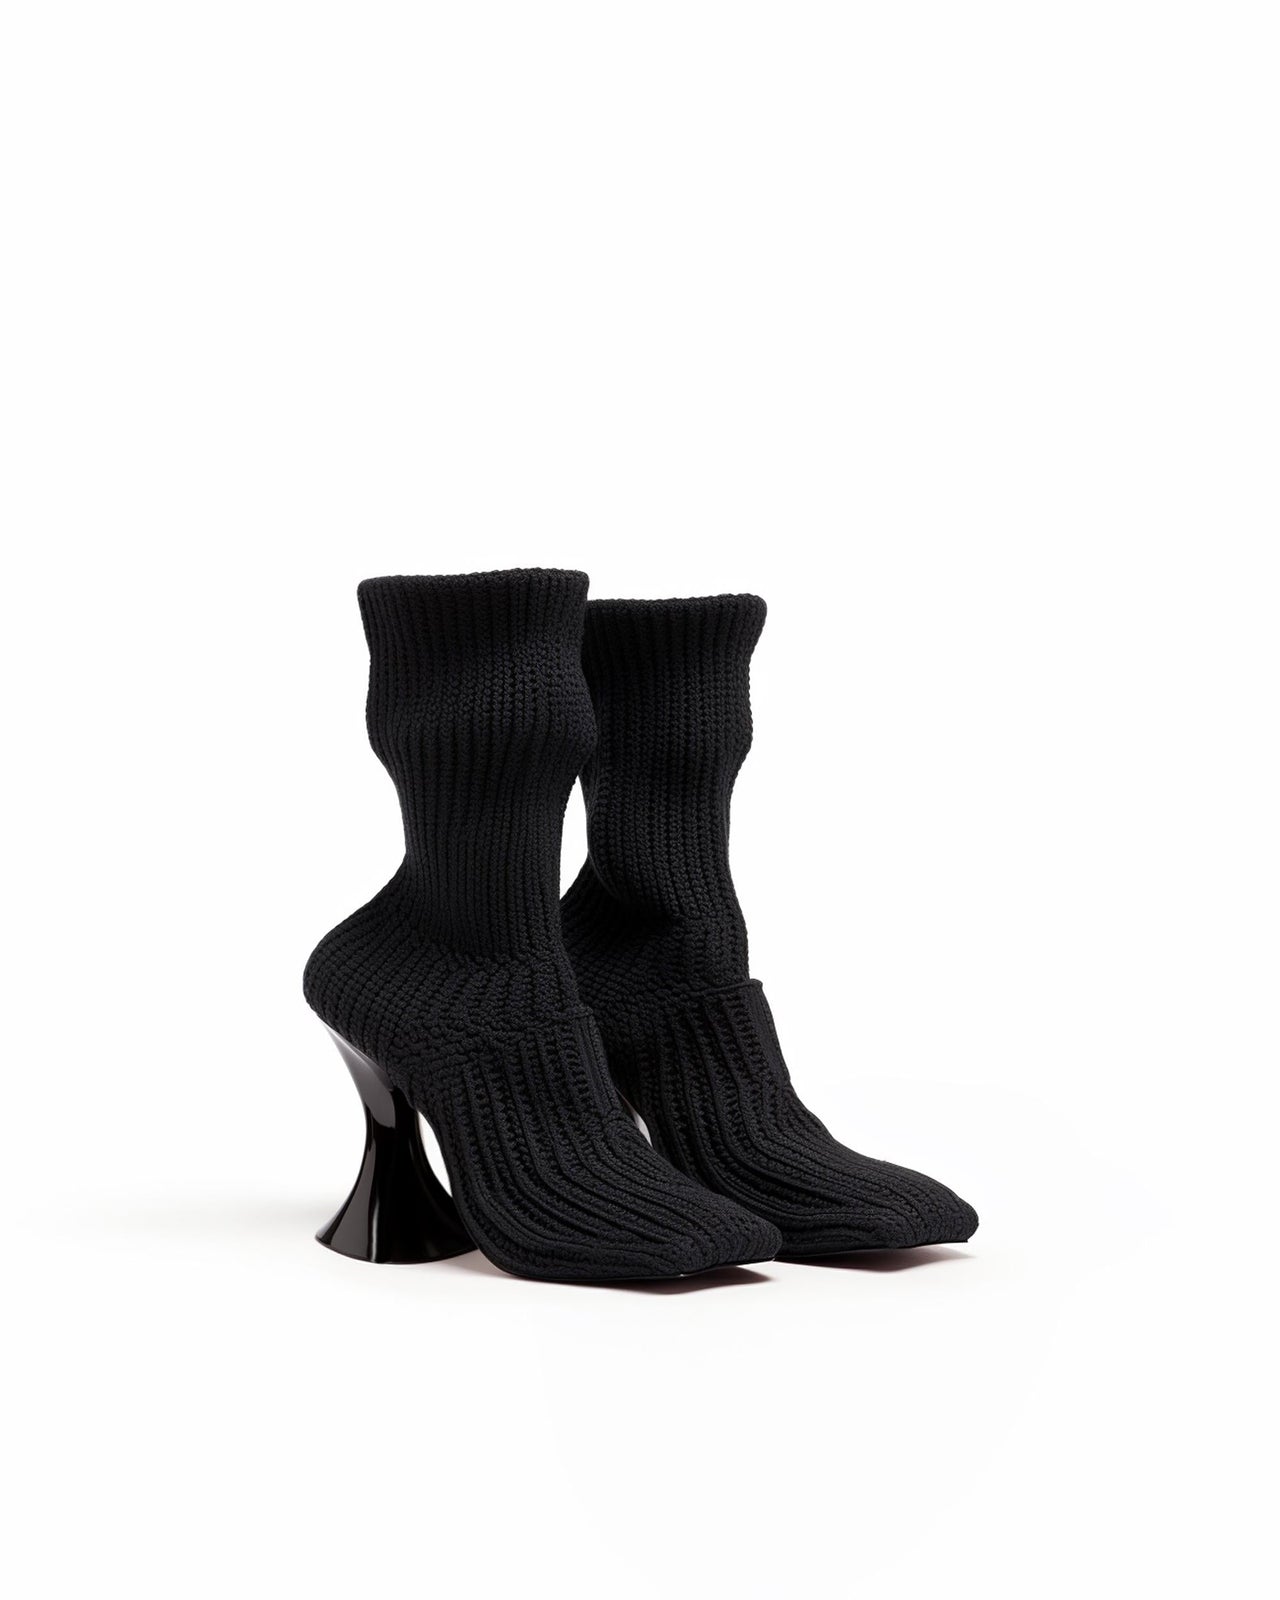 Sqaure Toe Knitted Ankle Boots- Black